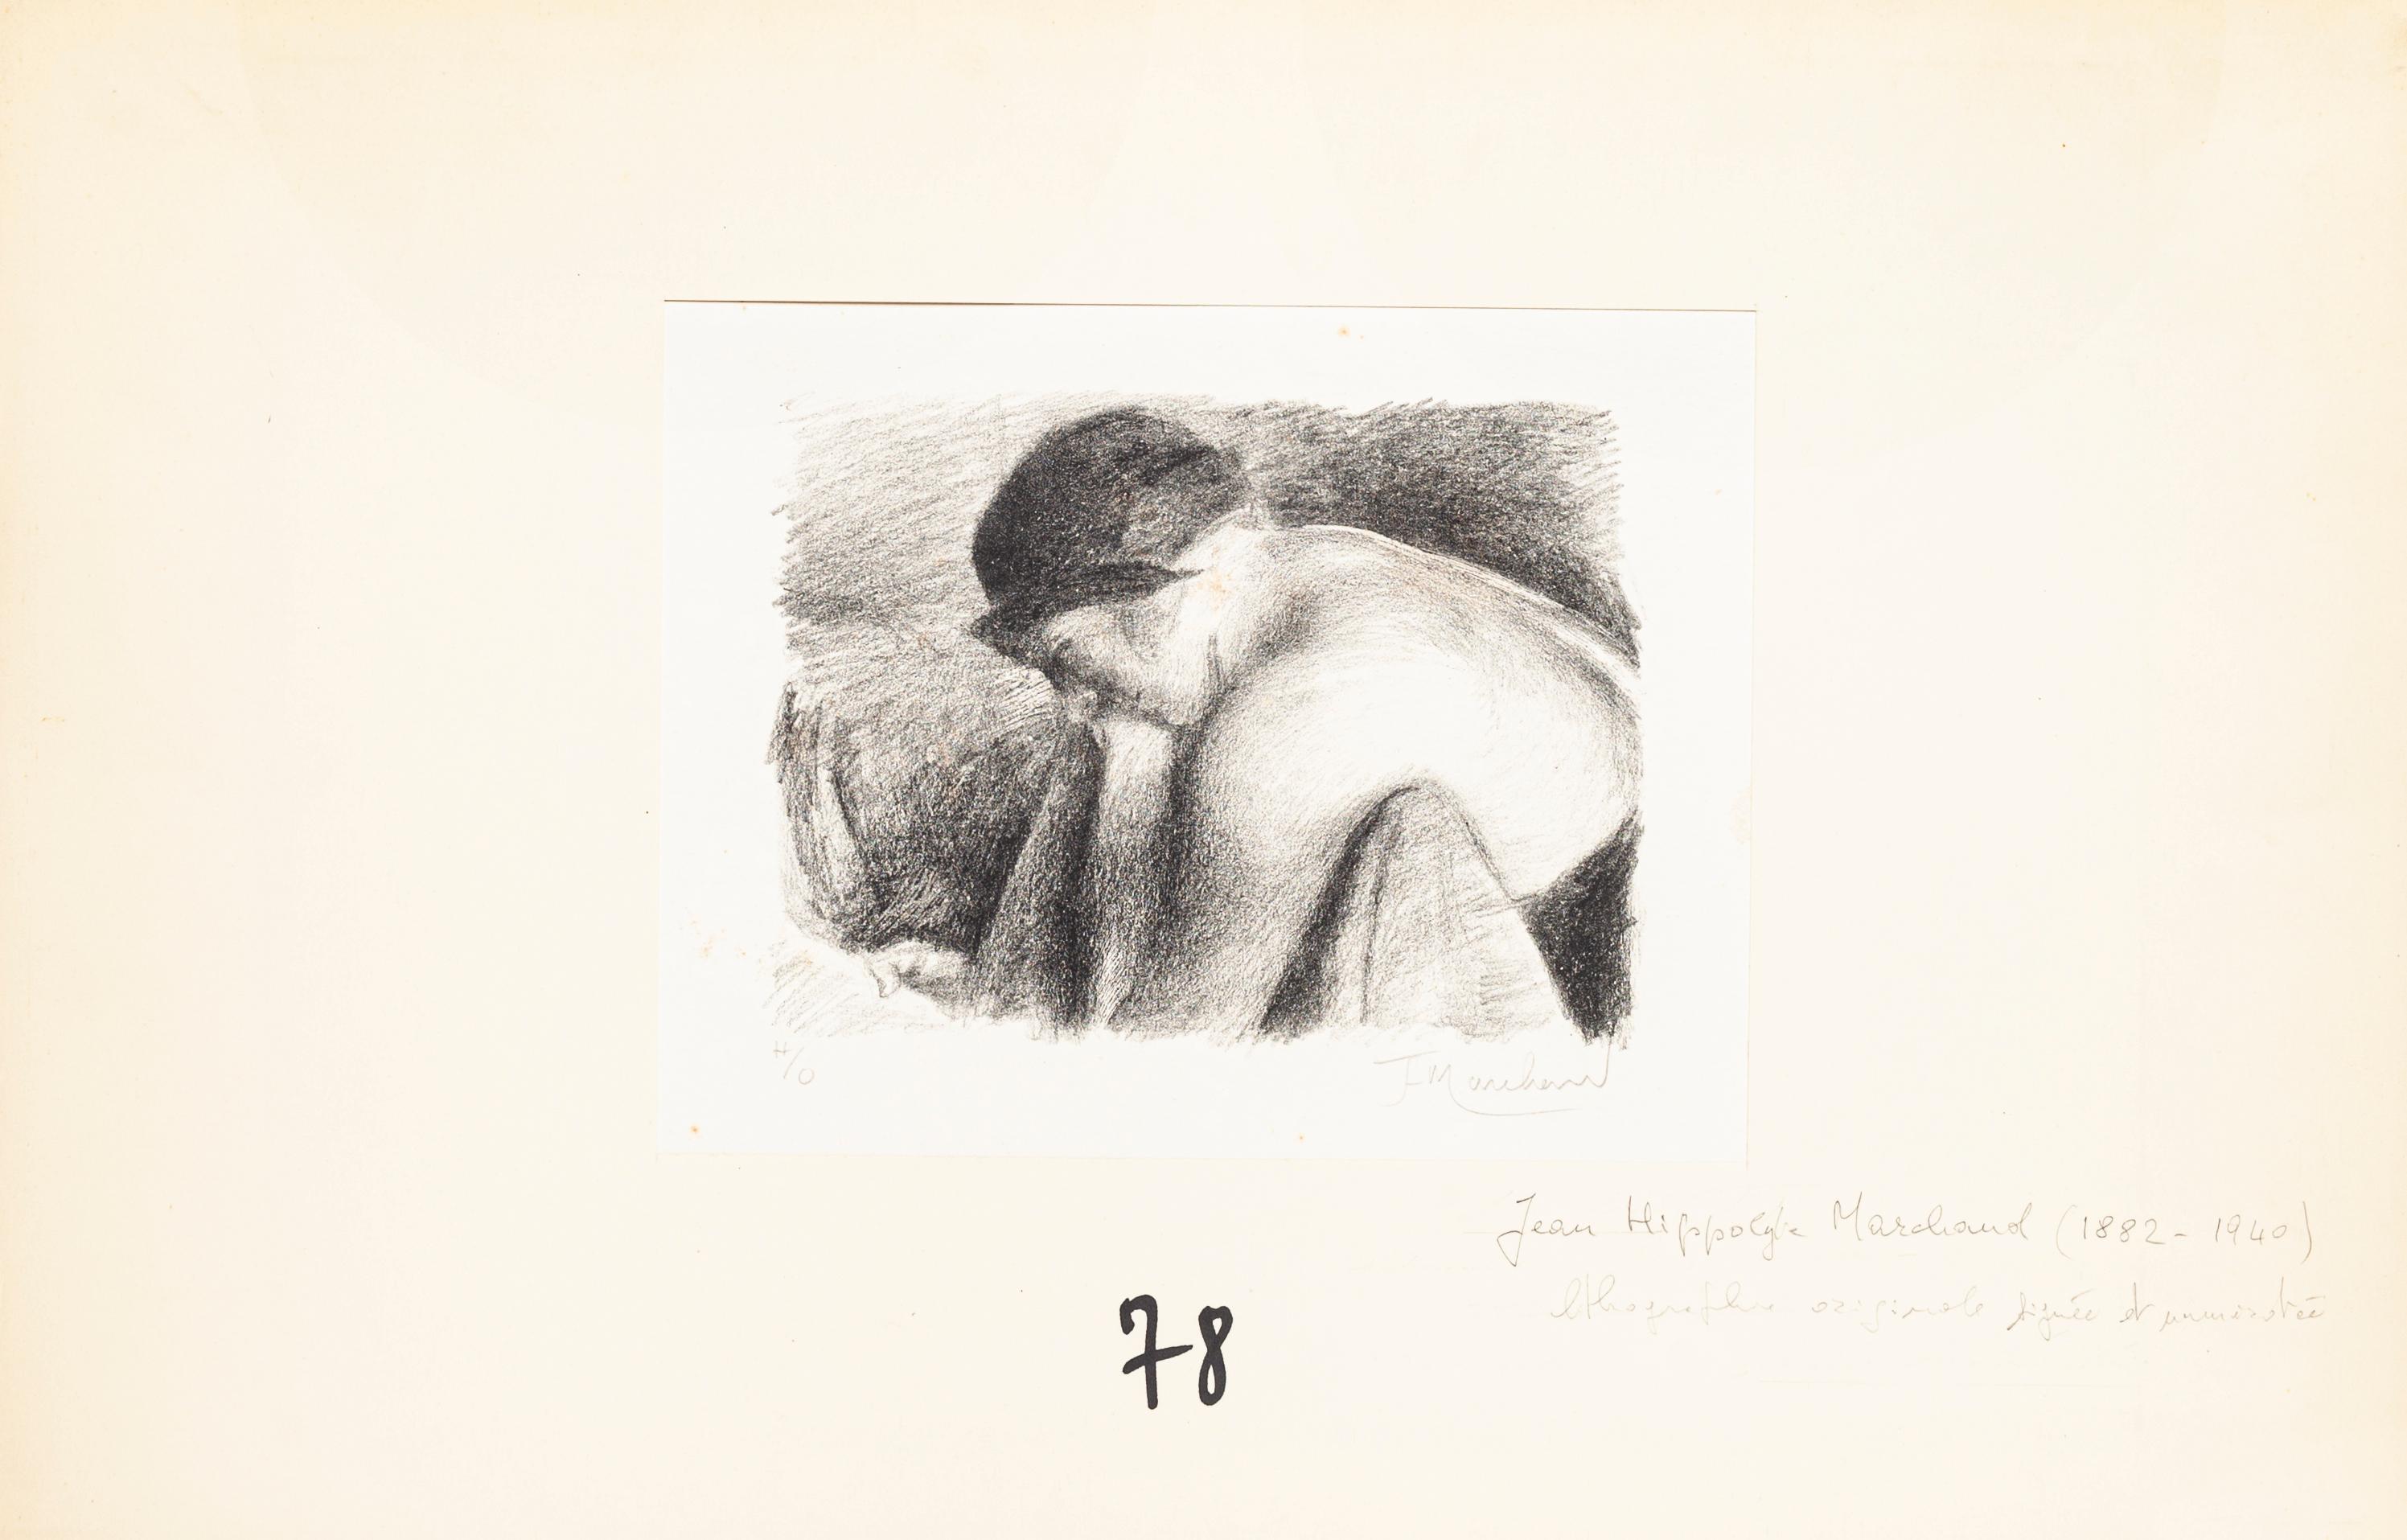 Female Figure with Hat - Original Lithograph by J.H. Marchand - 1920 ca. - Print by Jean Hippolyte Marchand